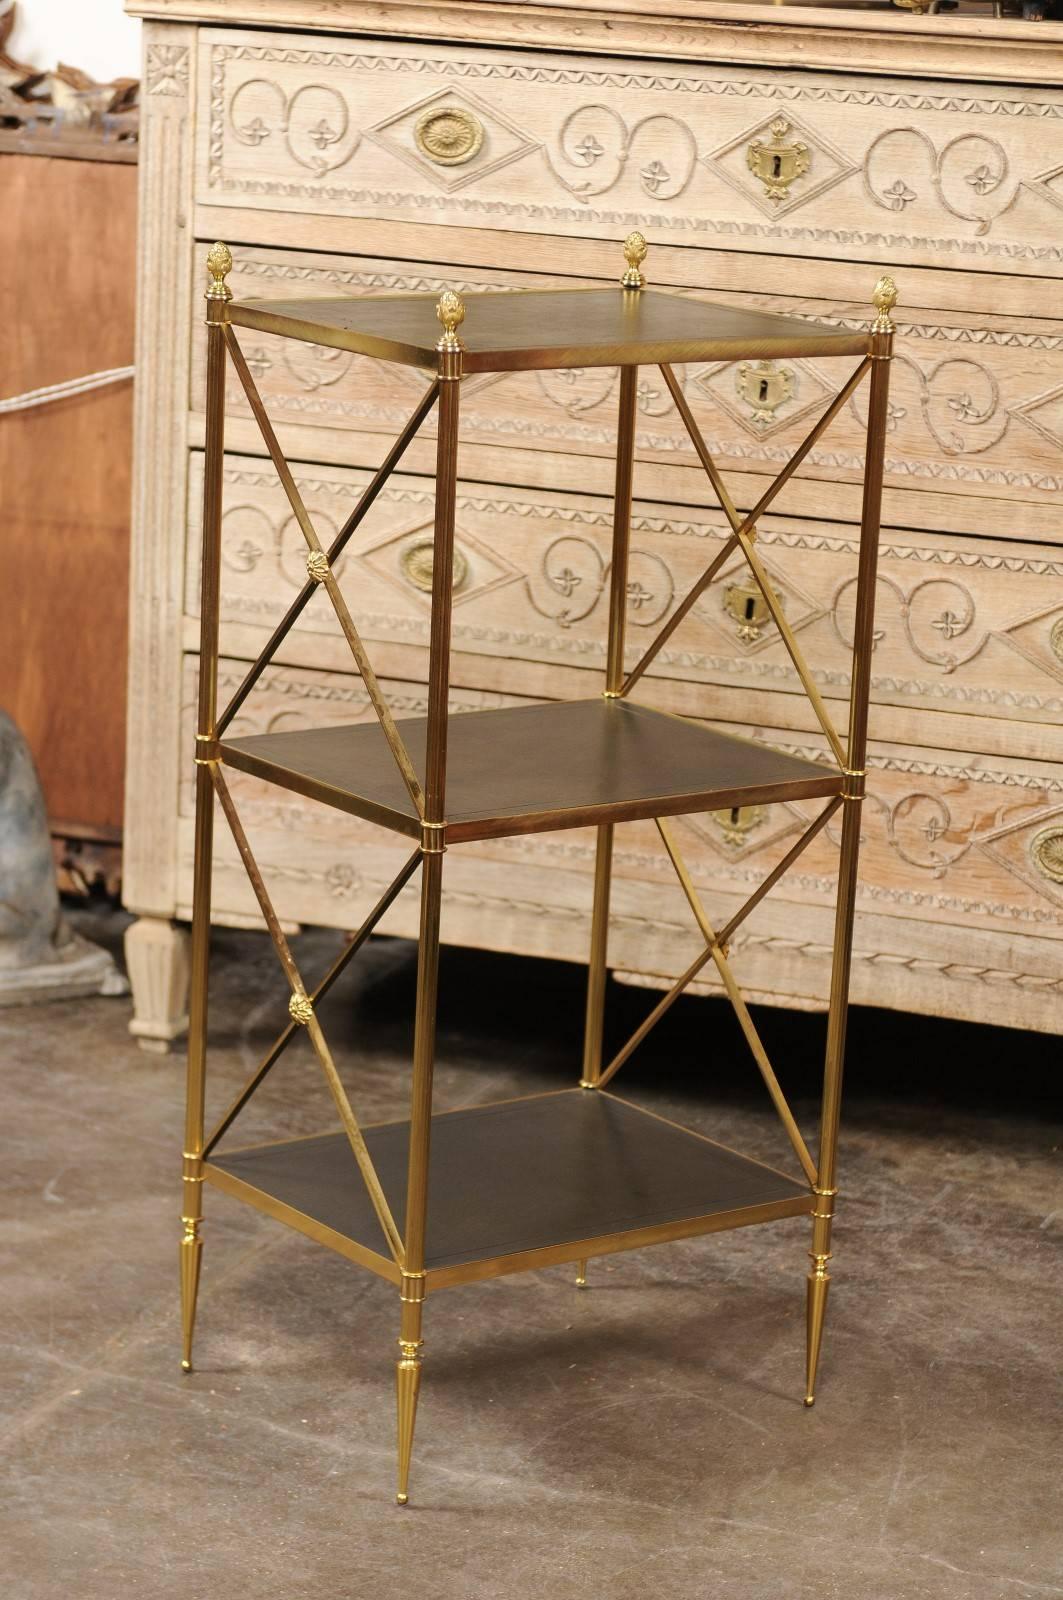 This Italian Maison Jansen style Mid-Century Modern tiered stand features a brass frame delicately flanking three black leather shelves. The upper shelf is adorned in each corner with four brass pinecone finials while the lower shelves are secured